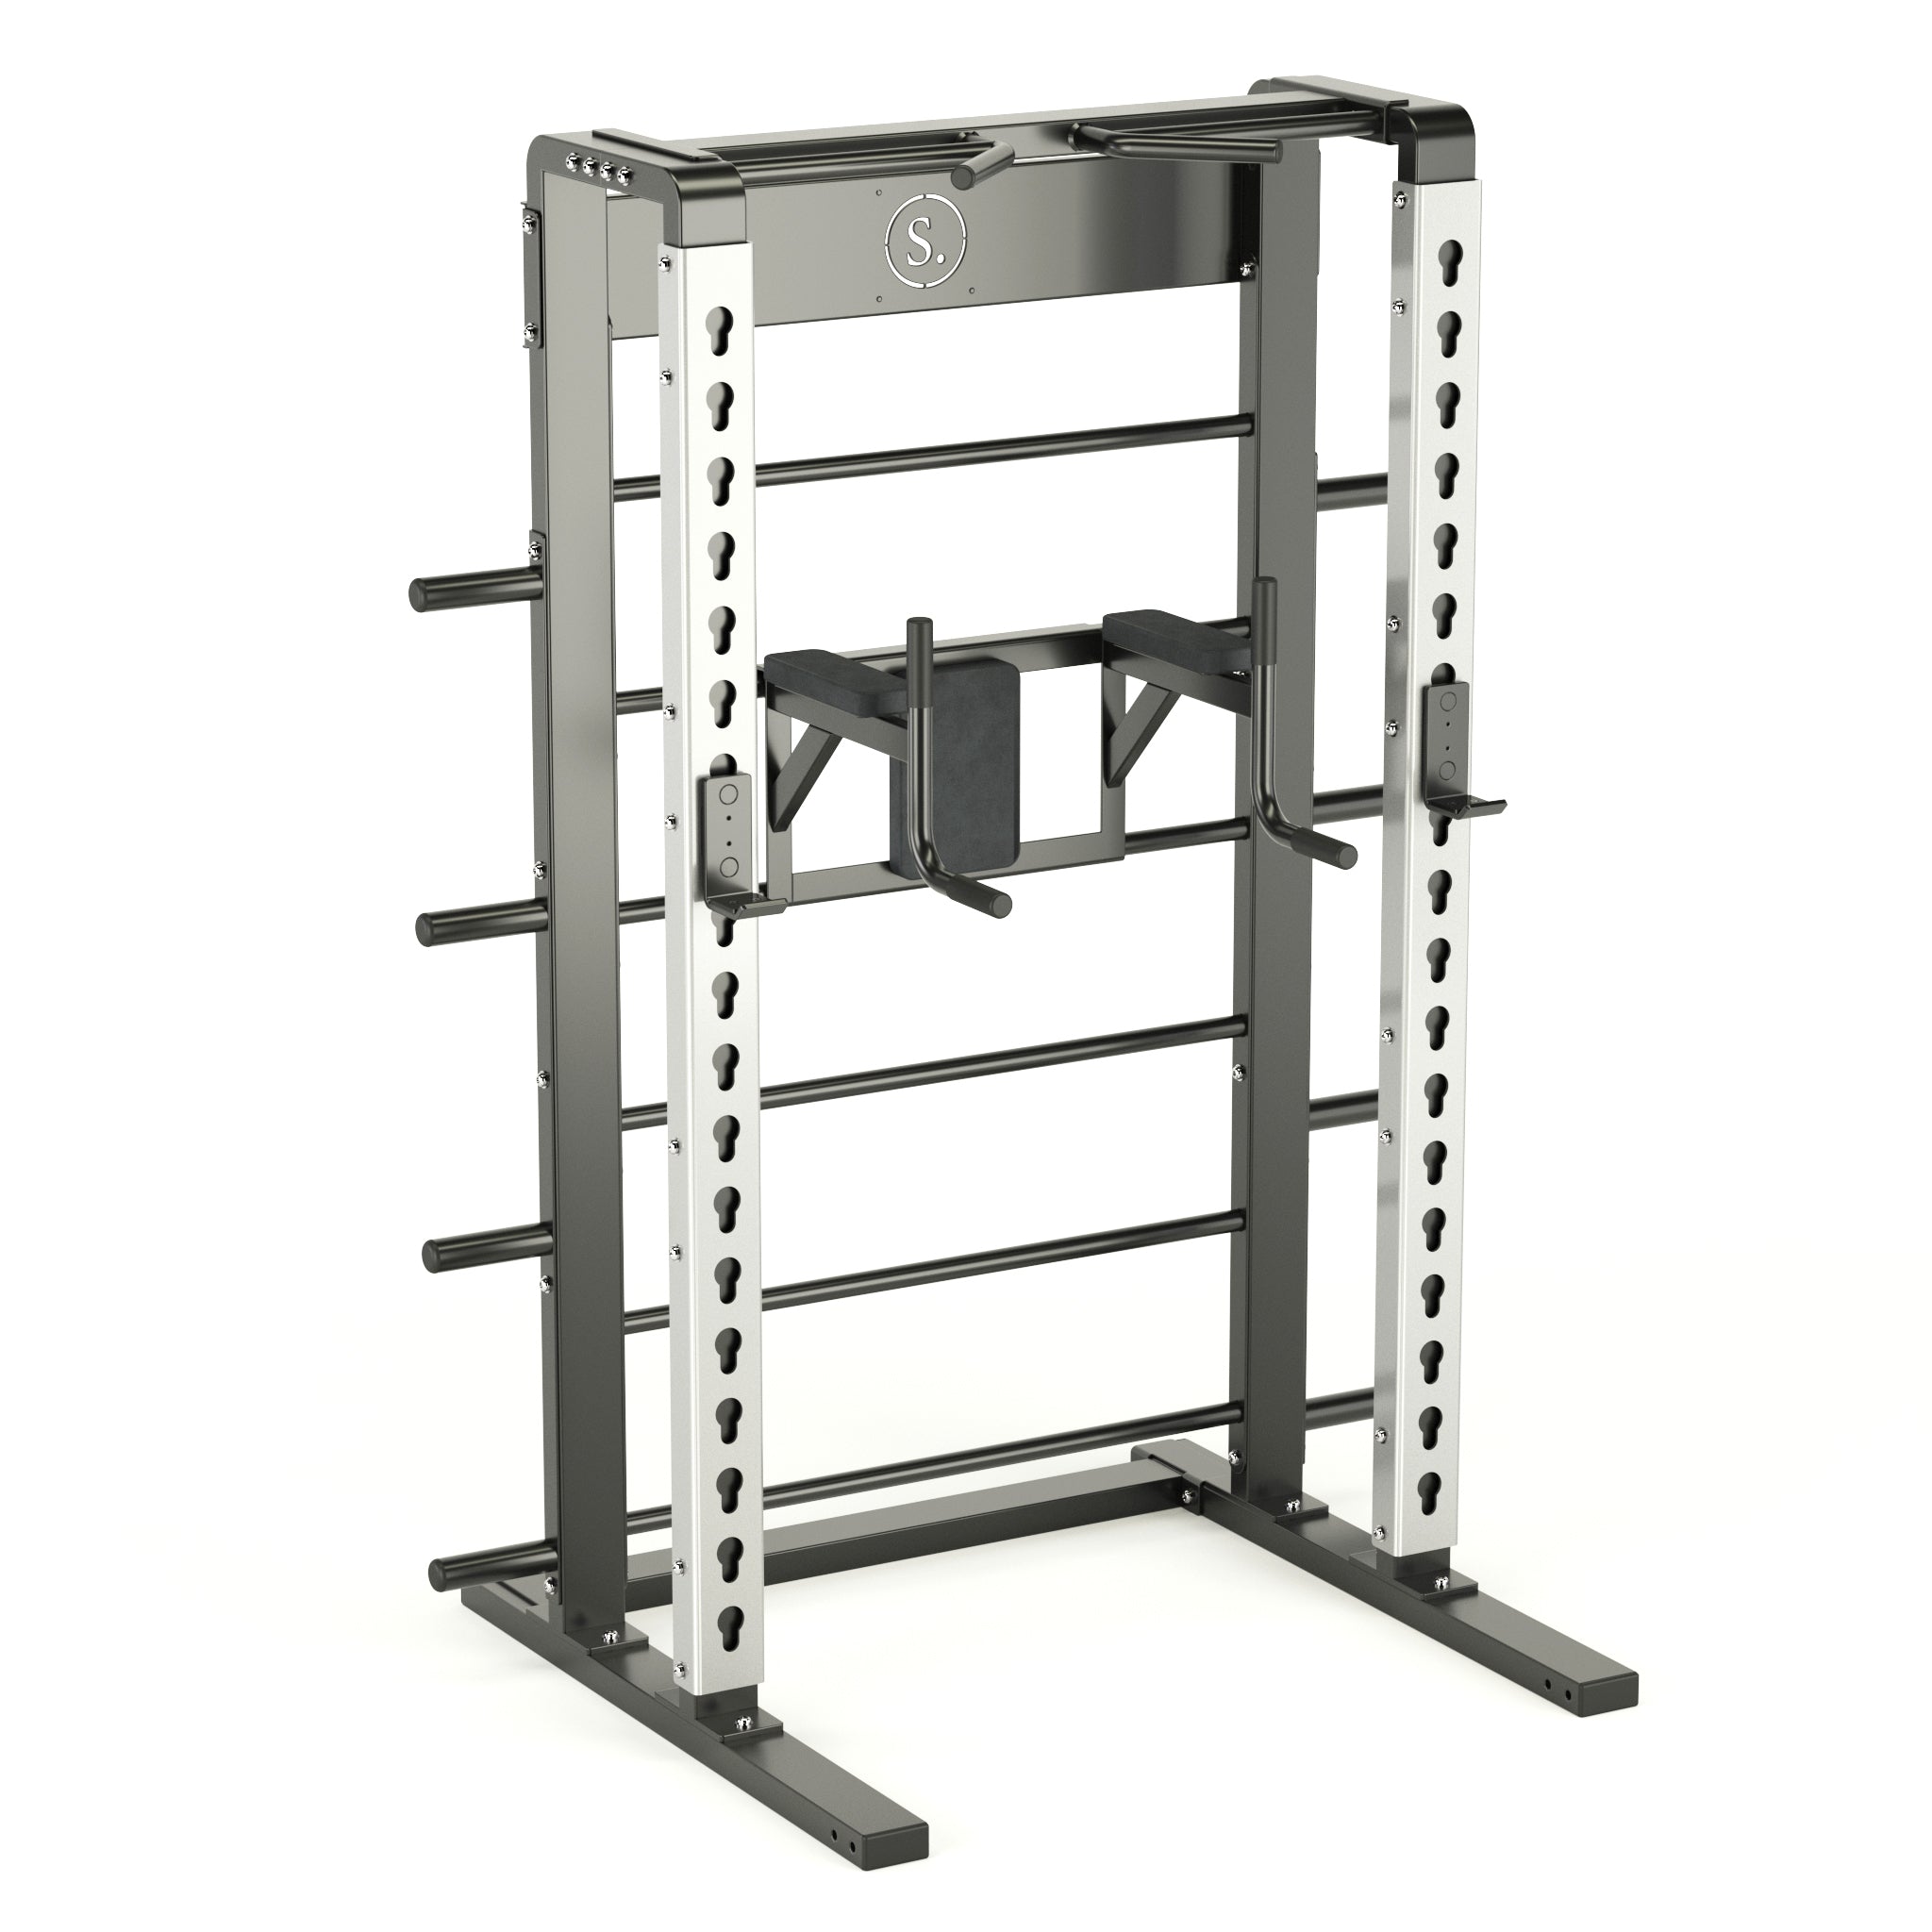 Solo Half Squat Rack with Wall Bars, Dip and Leg Raise